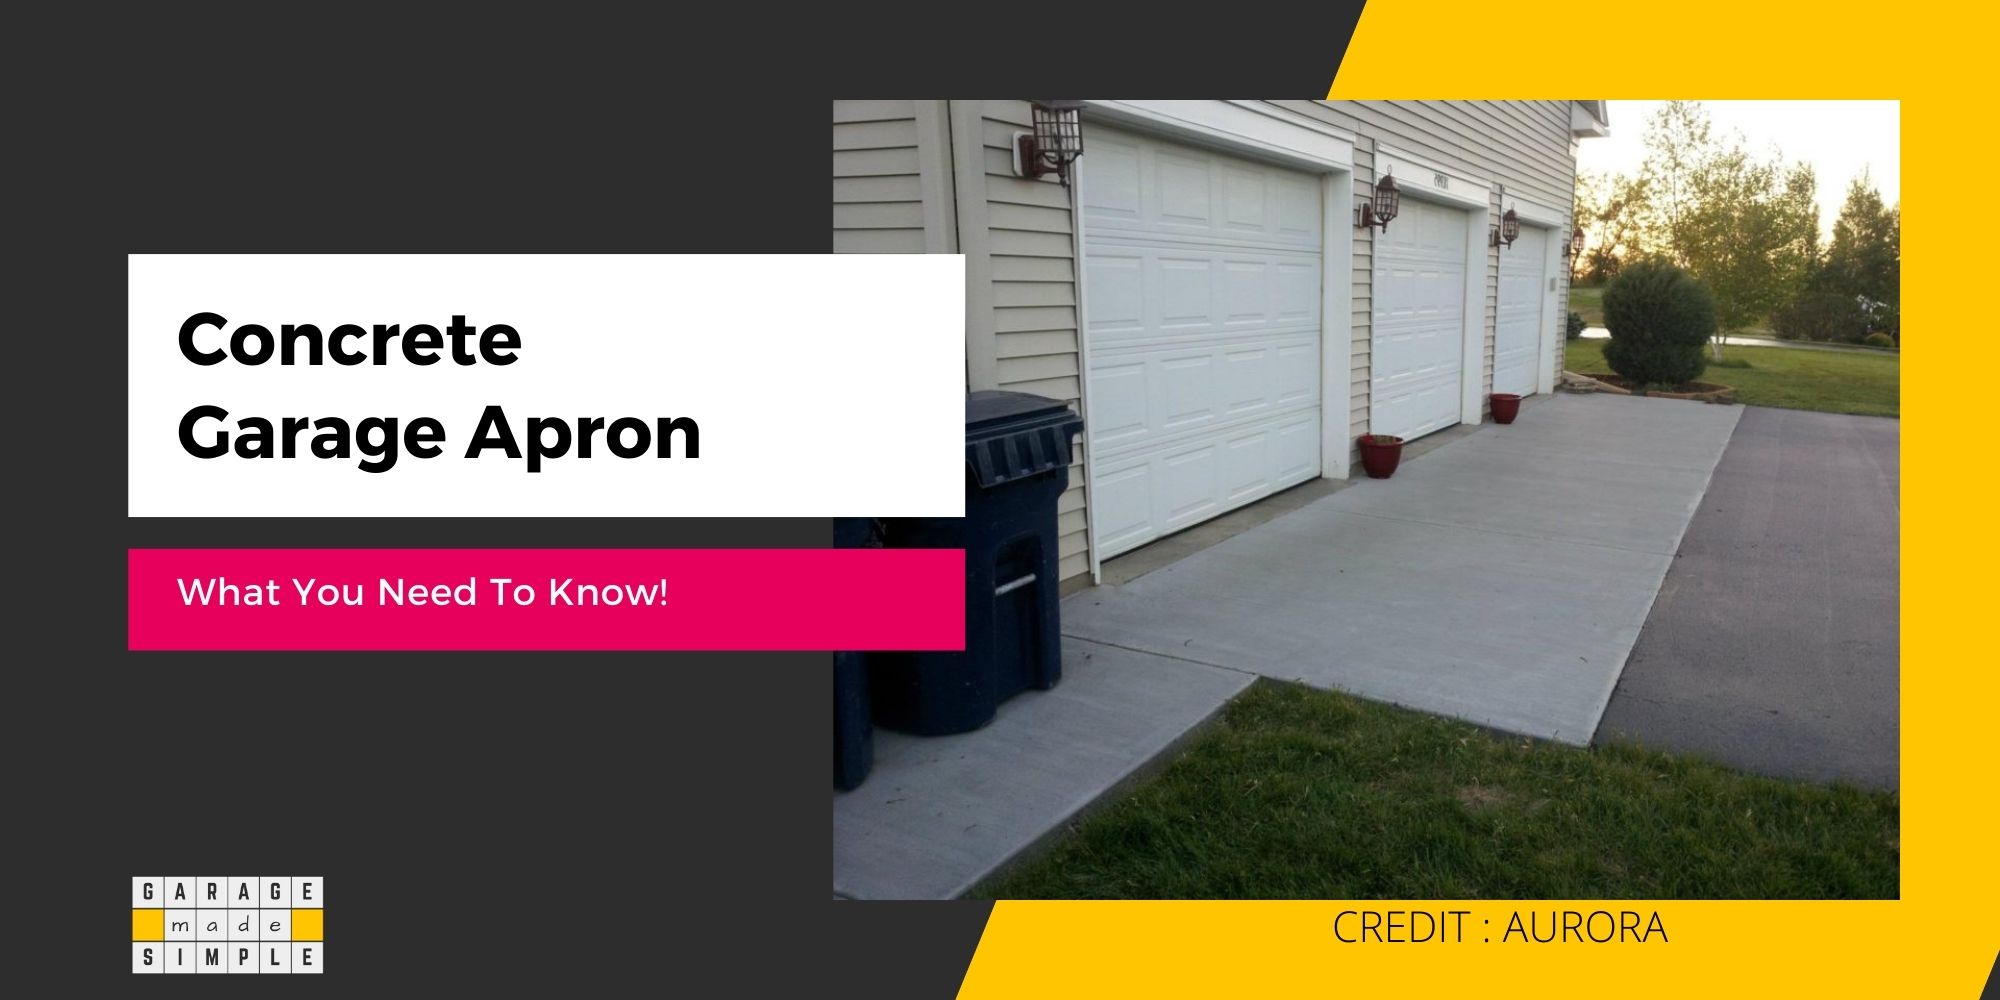 Why Is Concrete Garage Apron Important? (What You Need To Know)